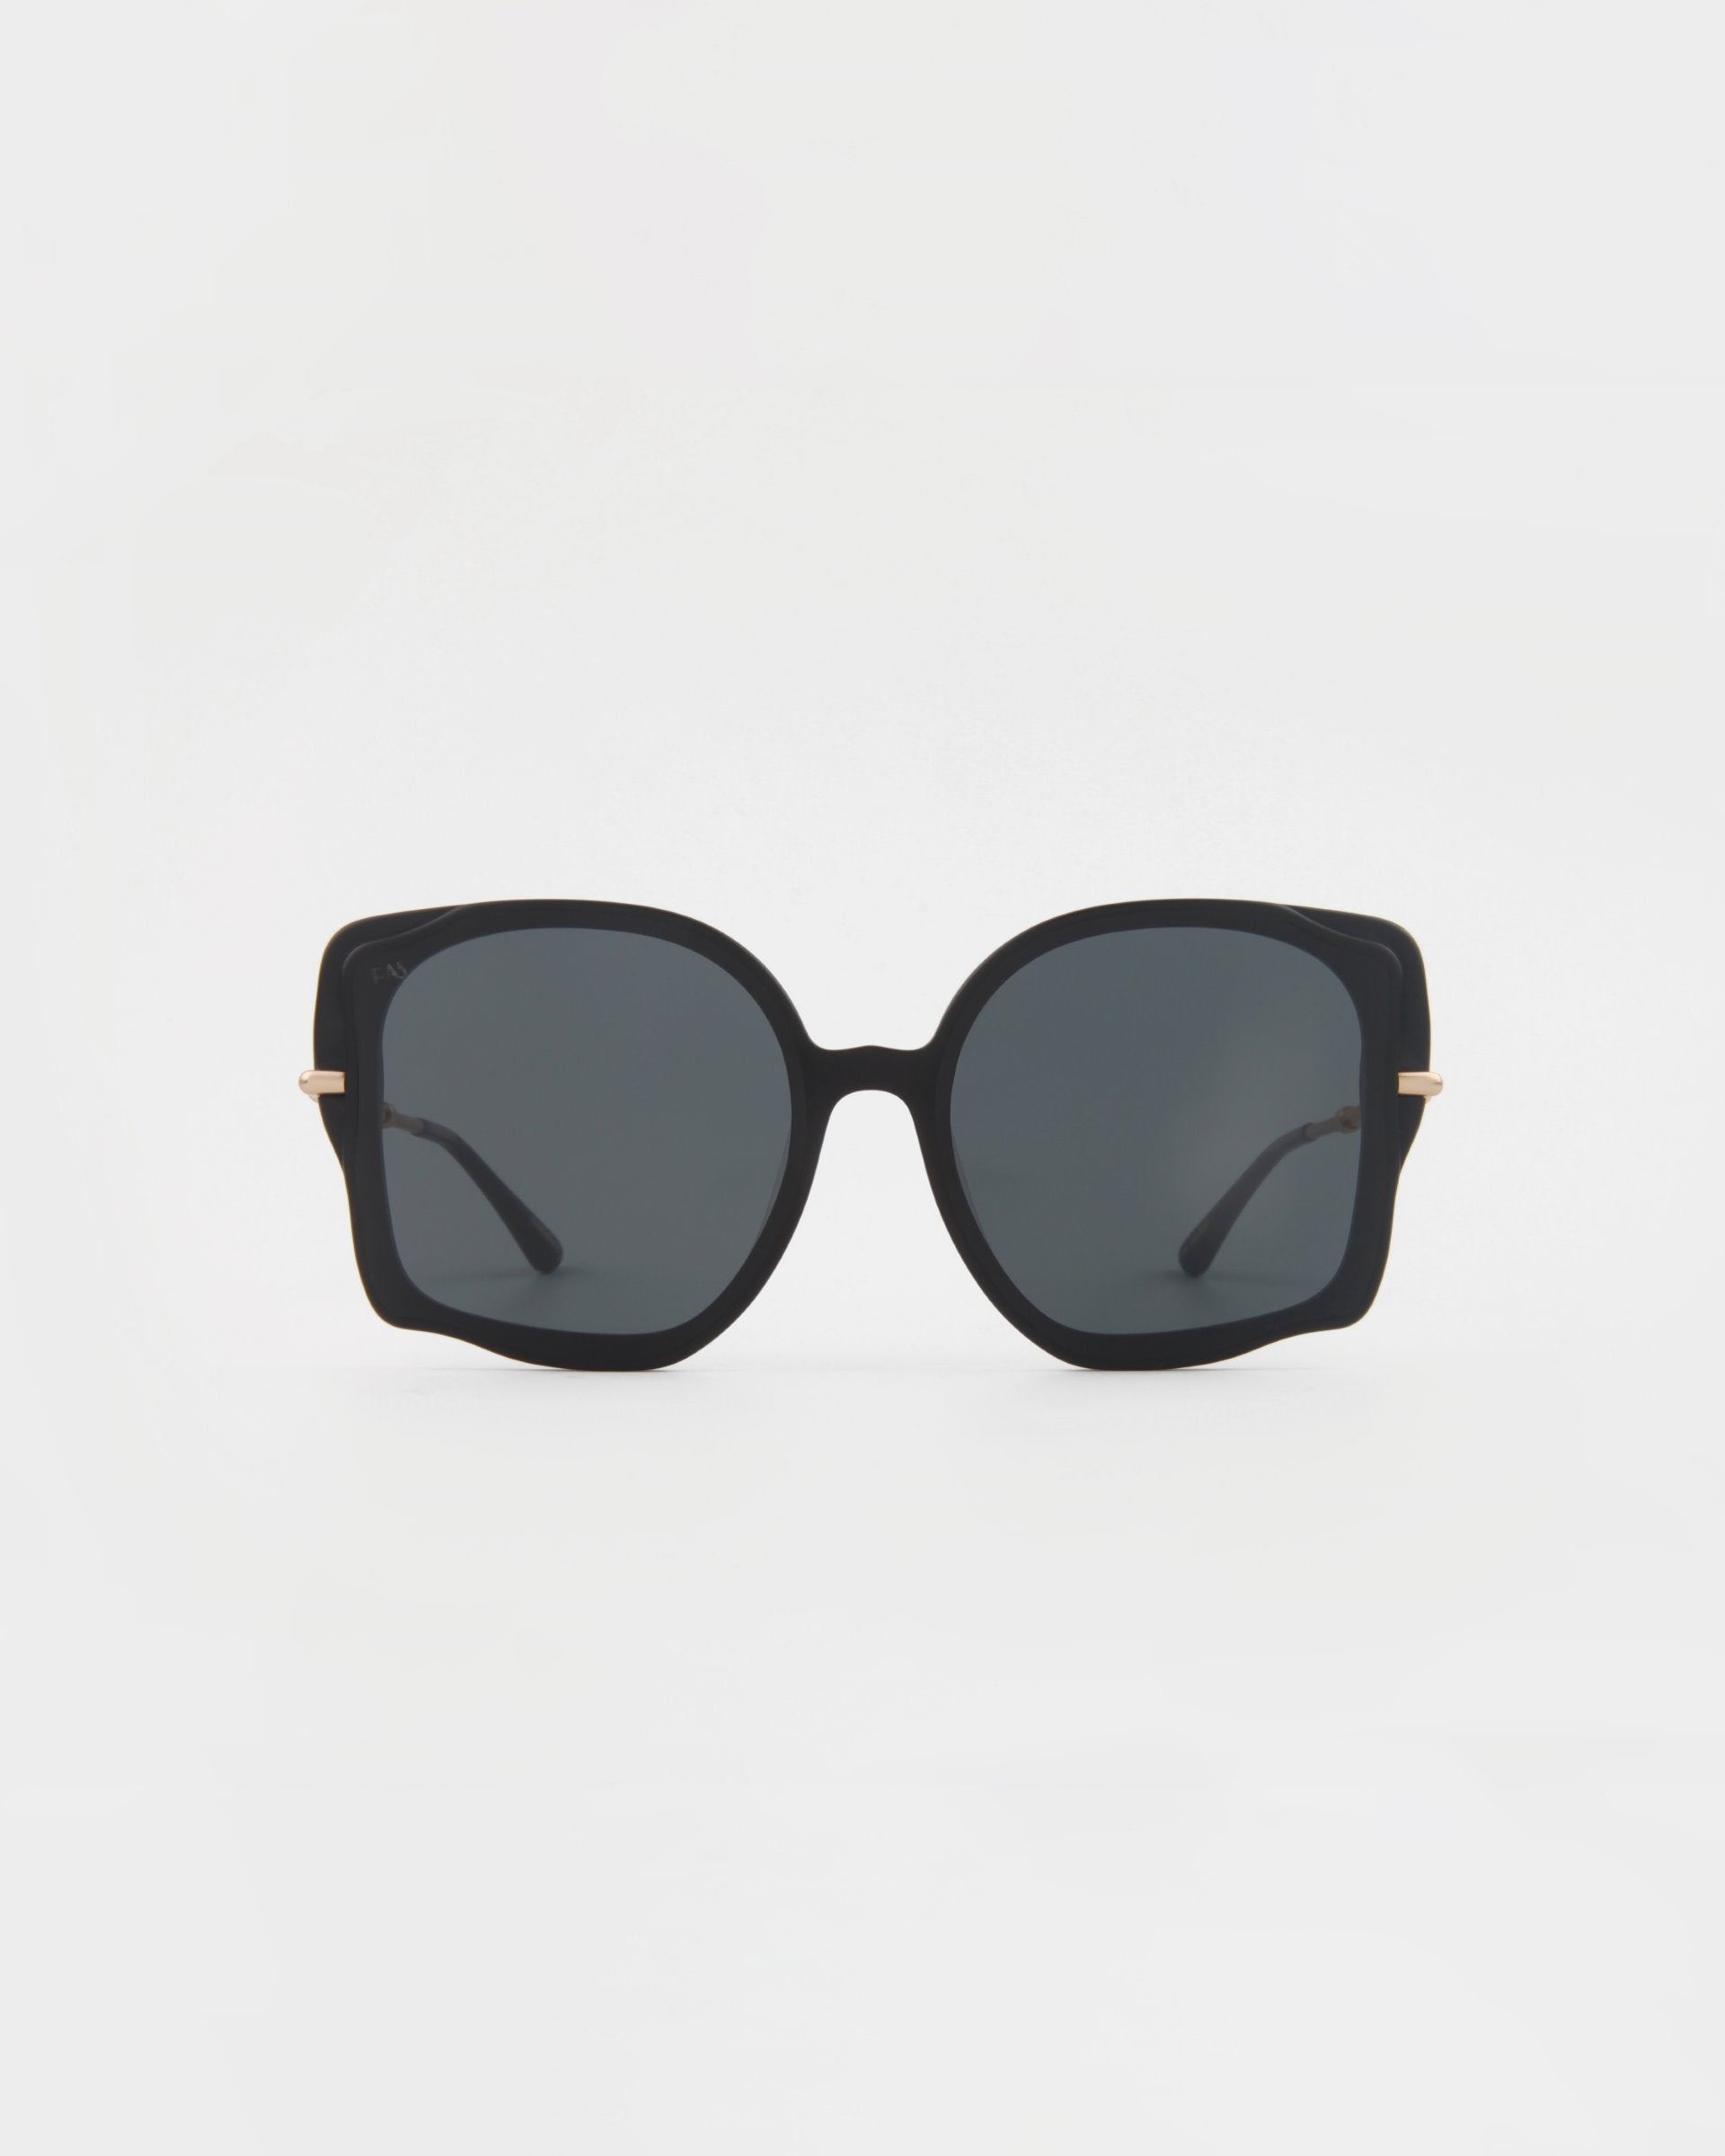 The Fahrenheit by For Art's Sake®: A pair of oversized square sunglasses with black frames and dark tinted lenses. These handmade acetate sunglasses feature thin 18-karat gold-plated accents on the outer sides of each lens, connecting to slender black arms. The background is plain white.